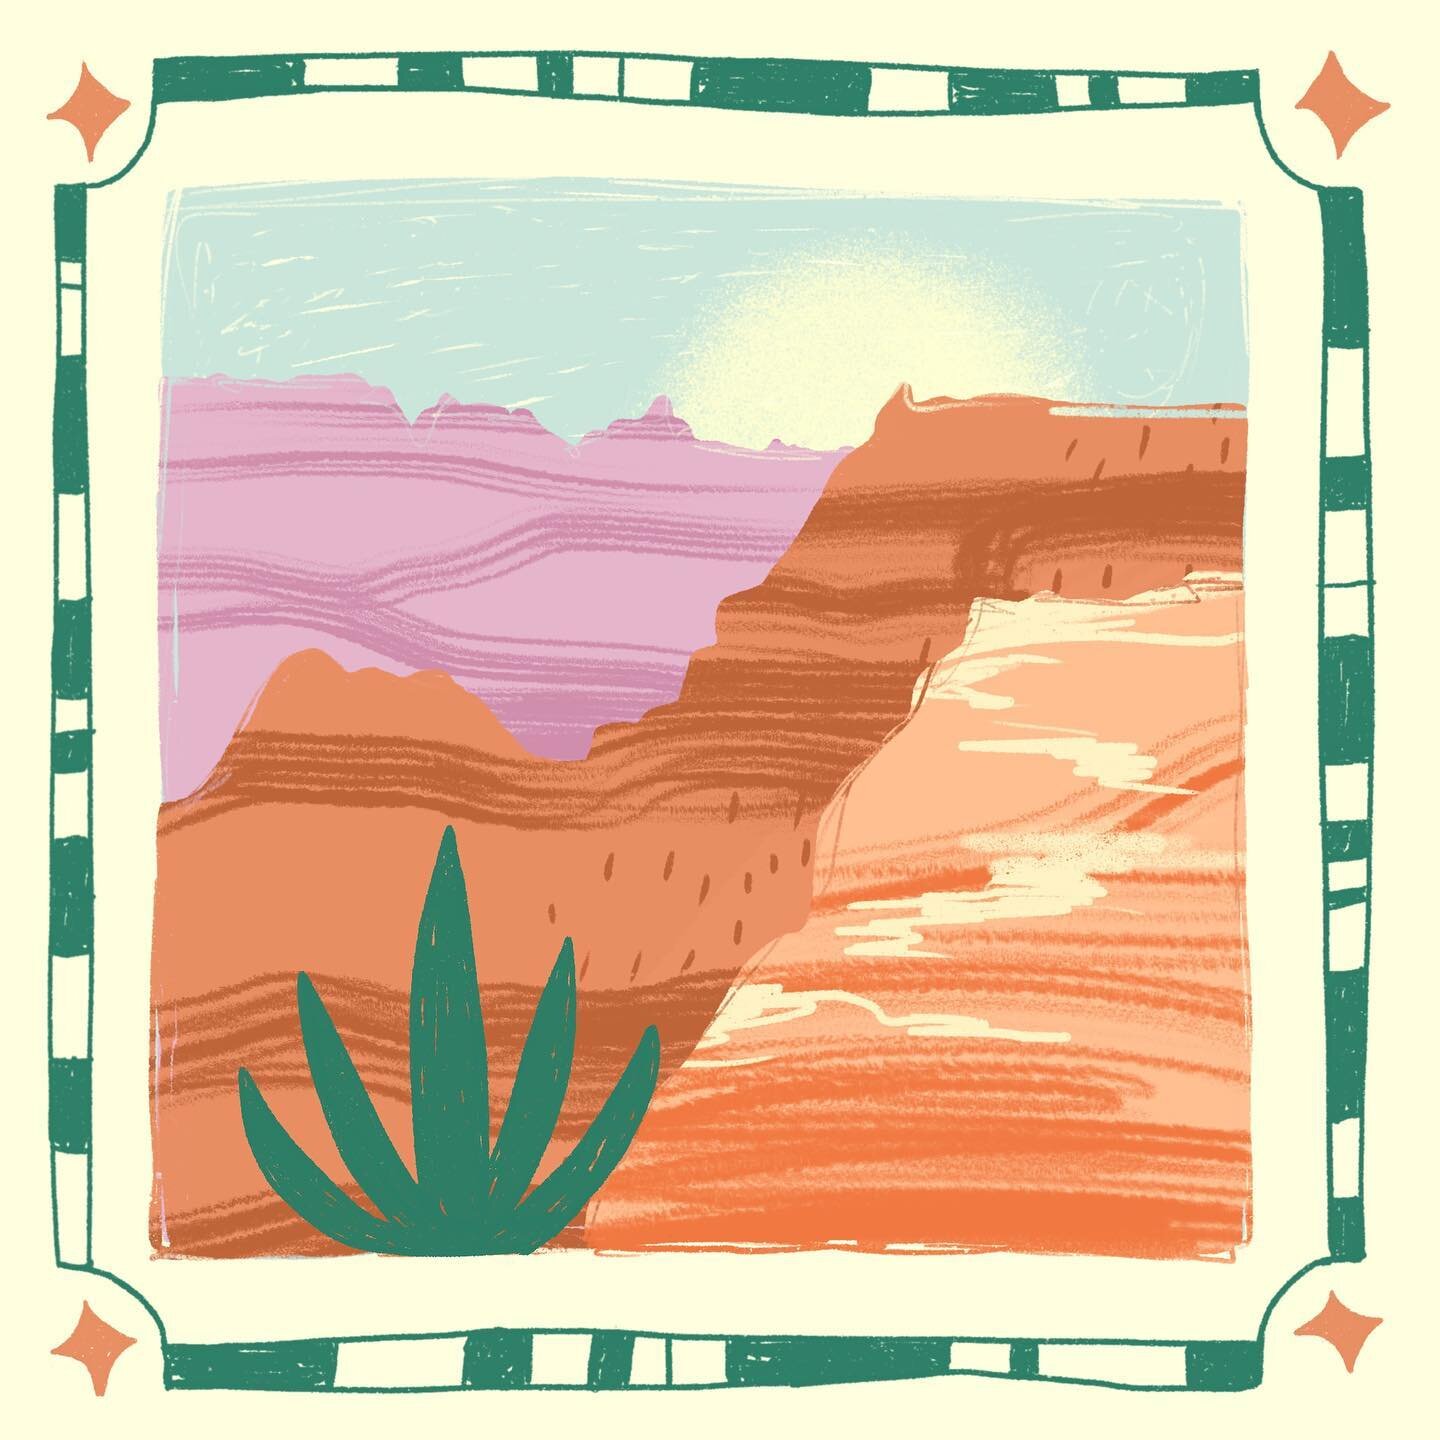 Definitely cried the moment I saw the Grand Canyon for the first time?? 10/10 🧡

#illustration #procreate #ipadpro #artistsoninstagram #grandcanyon #arizona